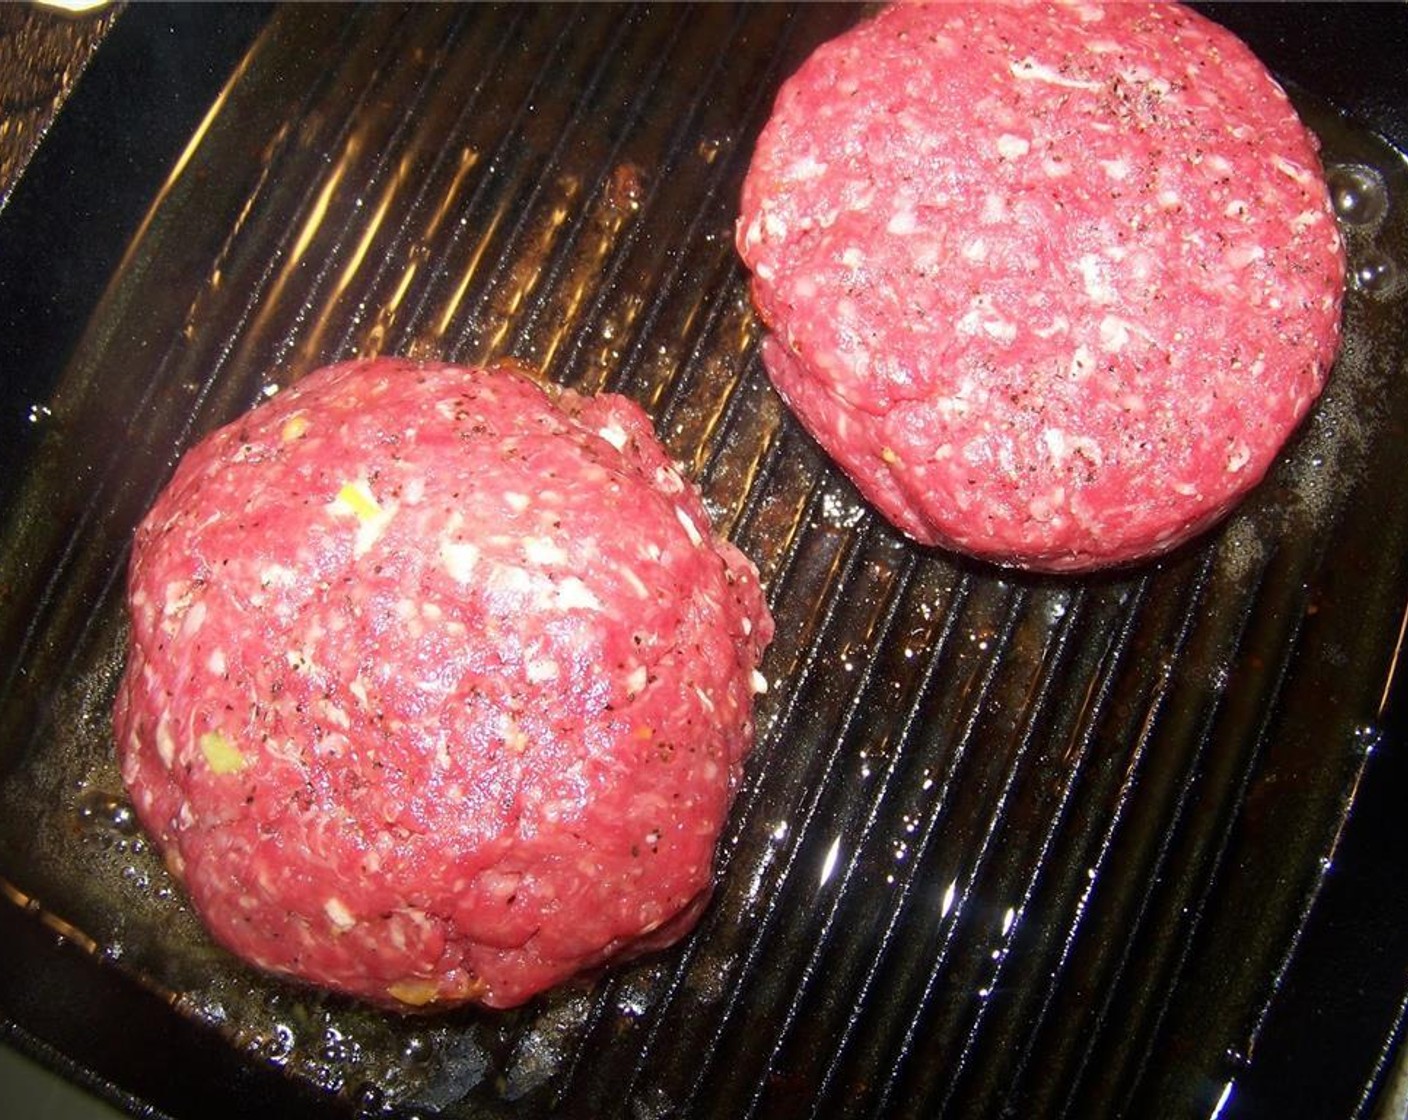 step 9 Heat a cast iron griddle with some canola oil on medium-high heat and grill the patties 5 to 6 minutes per side, until beef is cooked through and the cheese inside has melted.